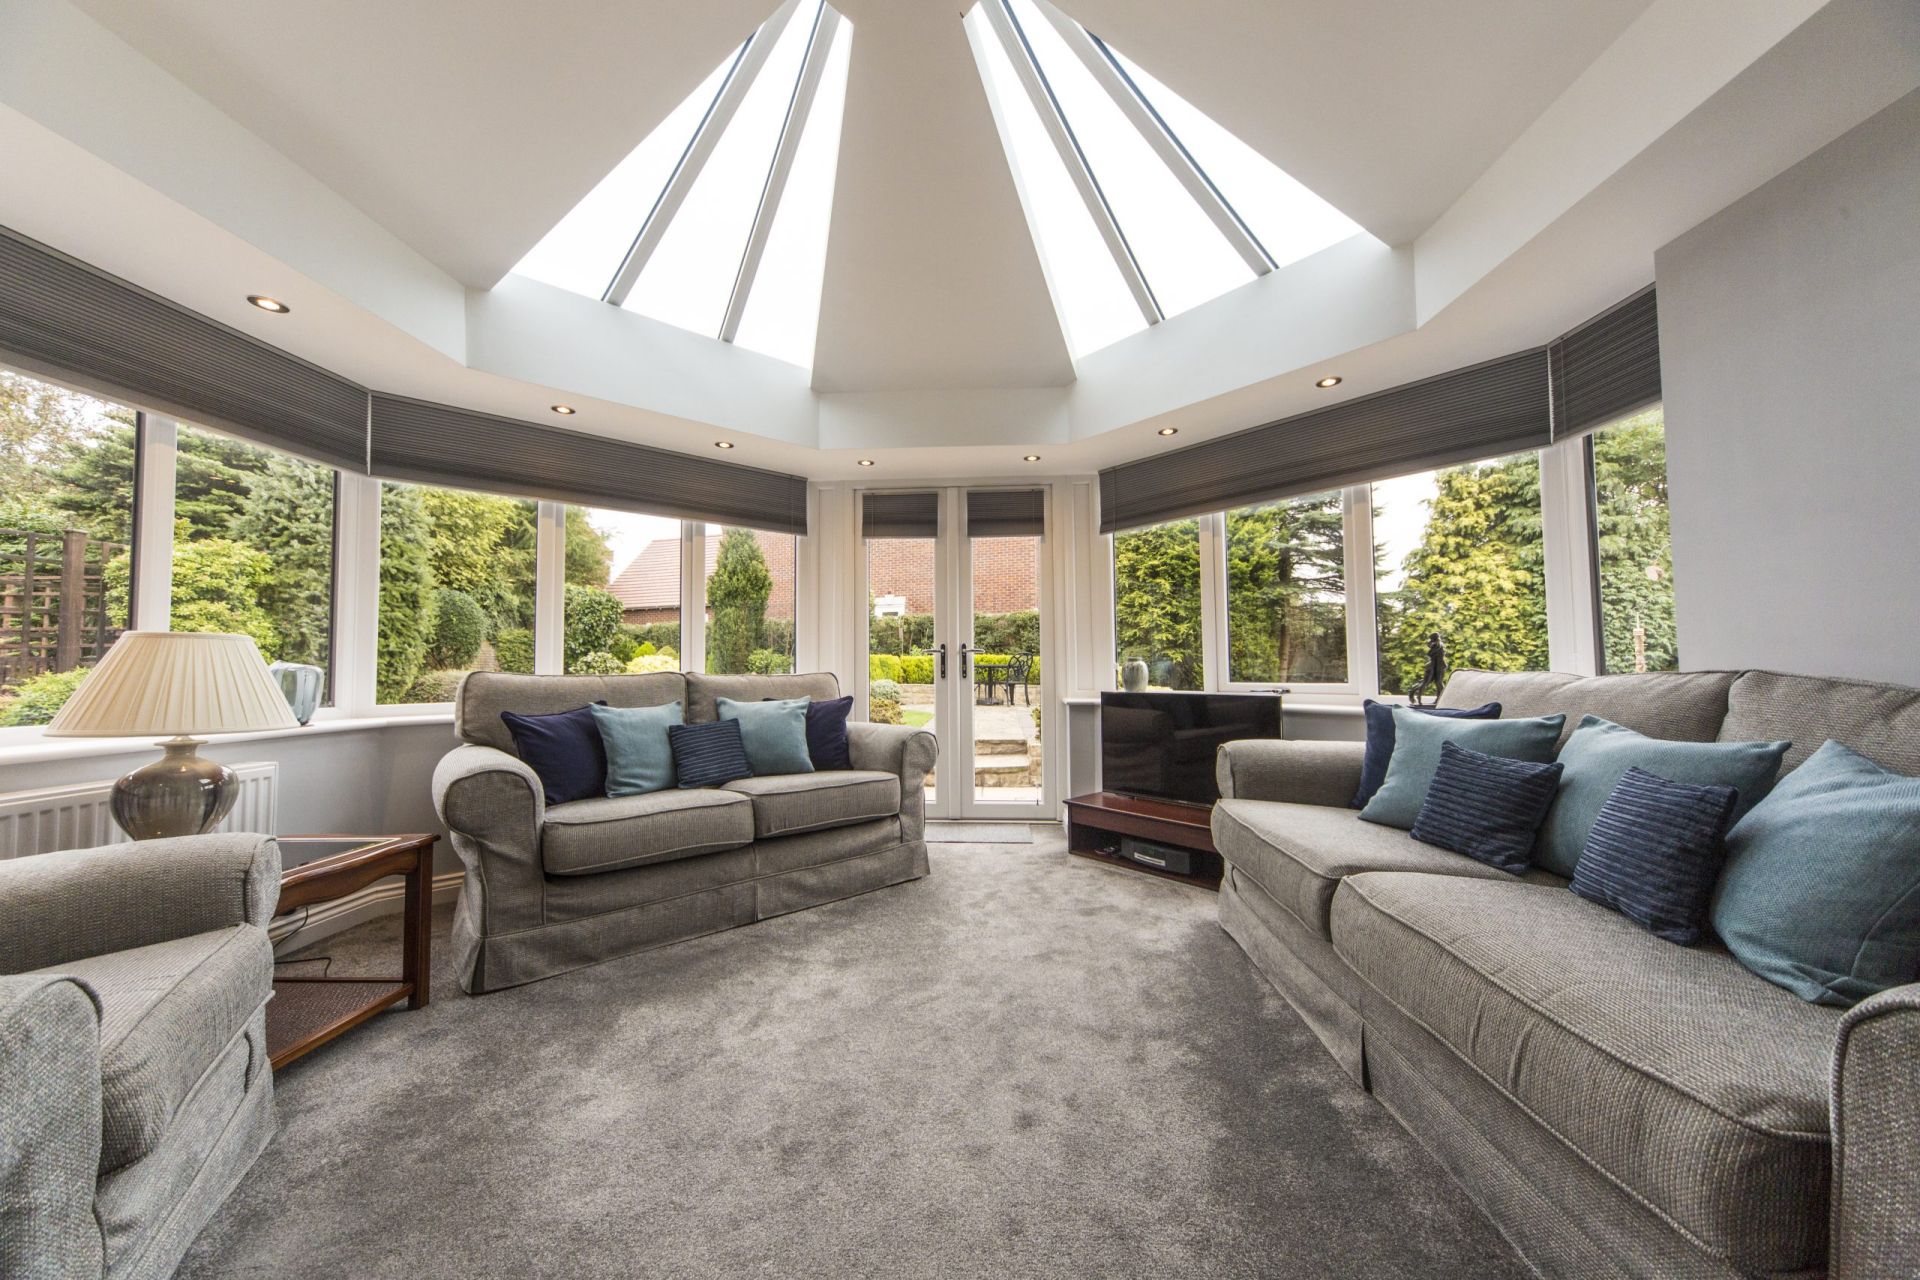 Private Conservatory with a Solid Roof